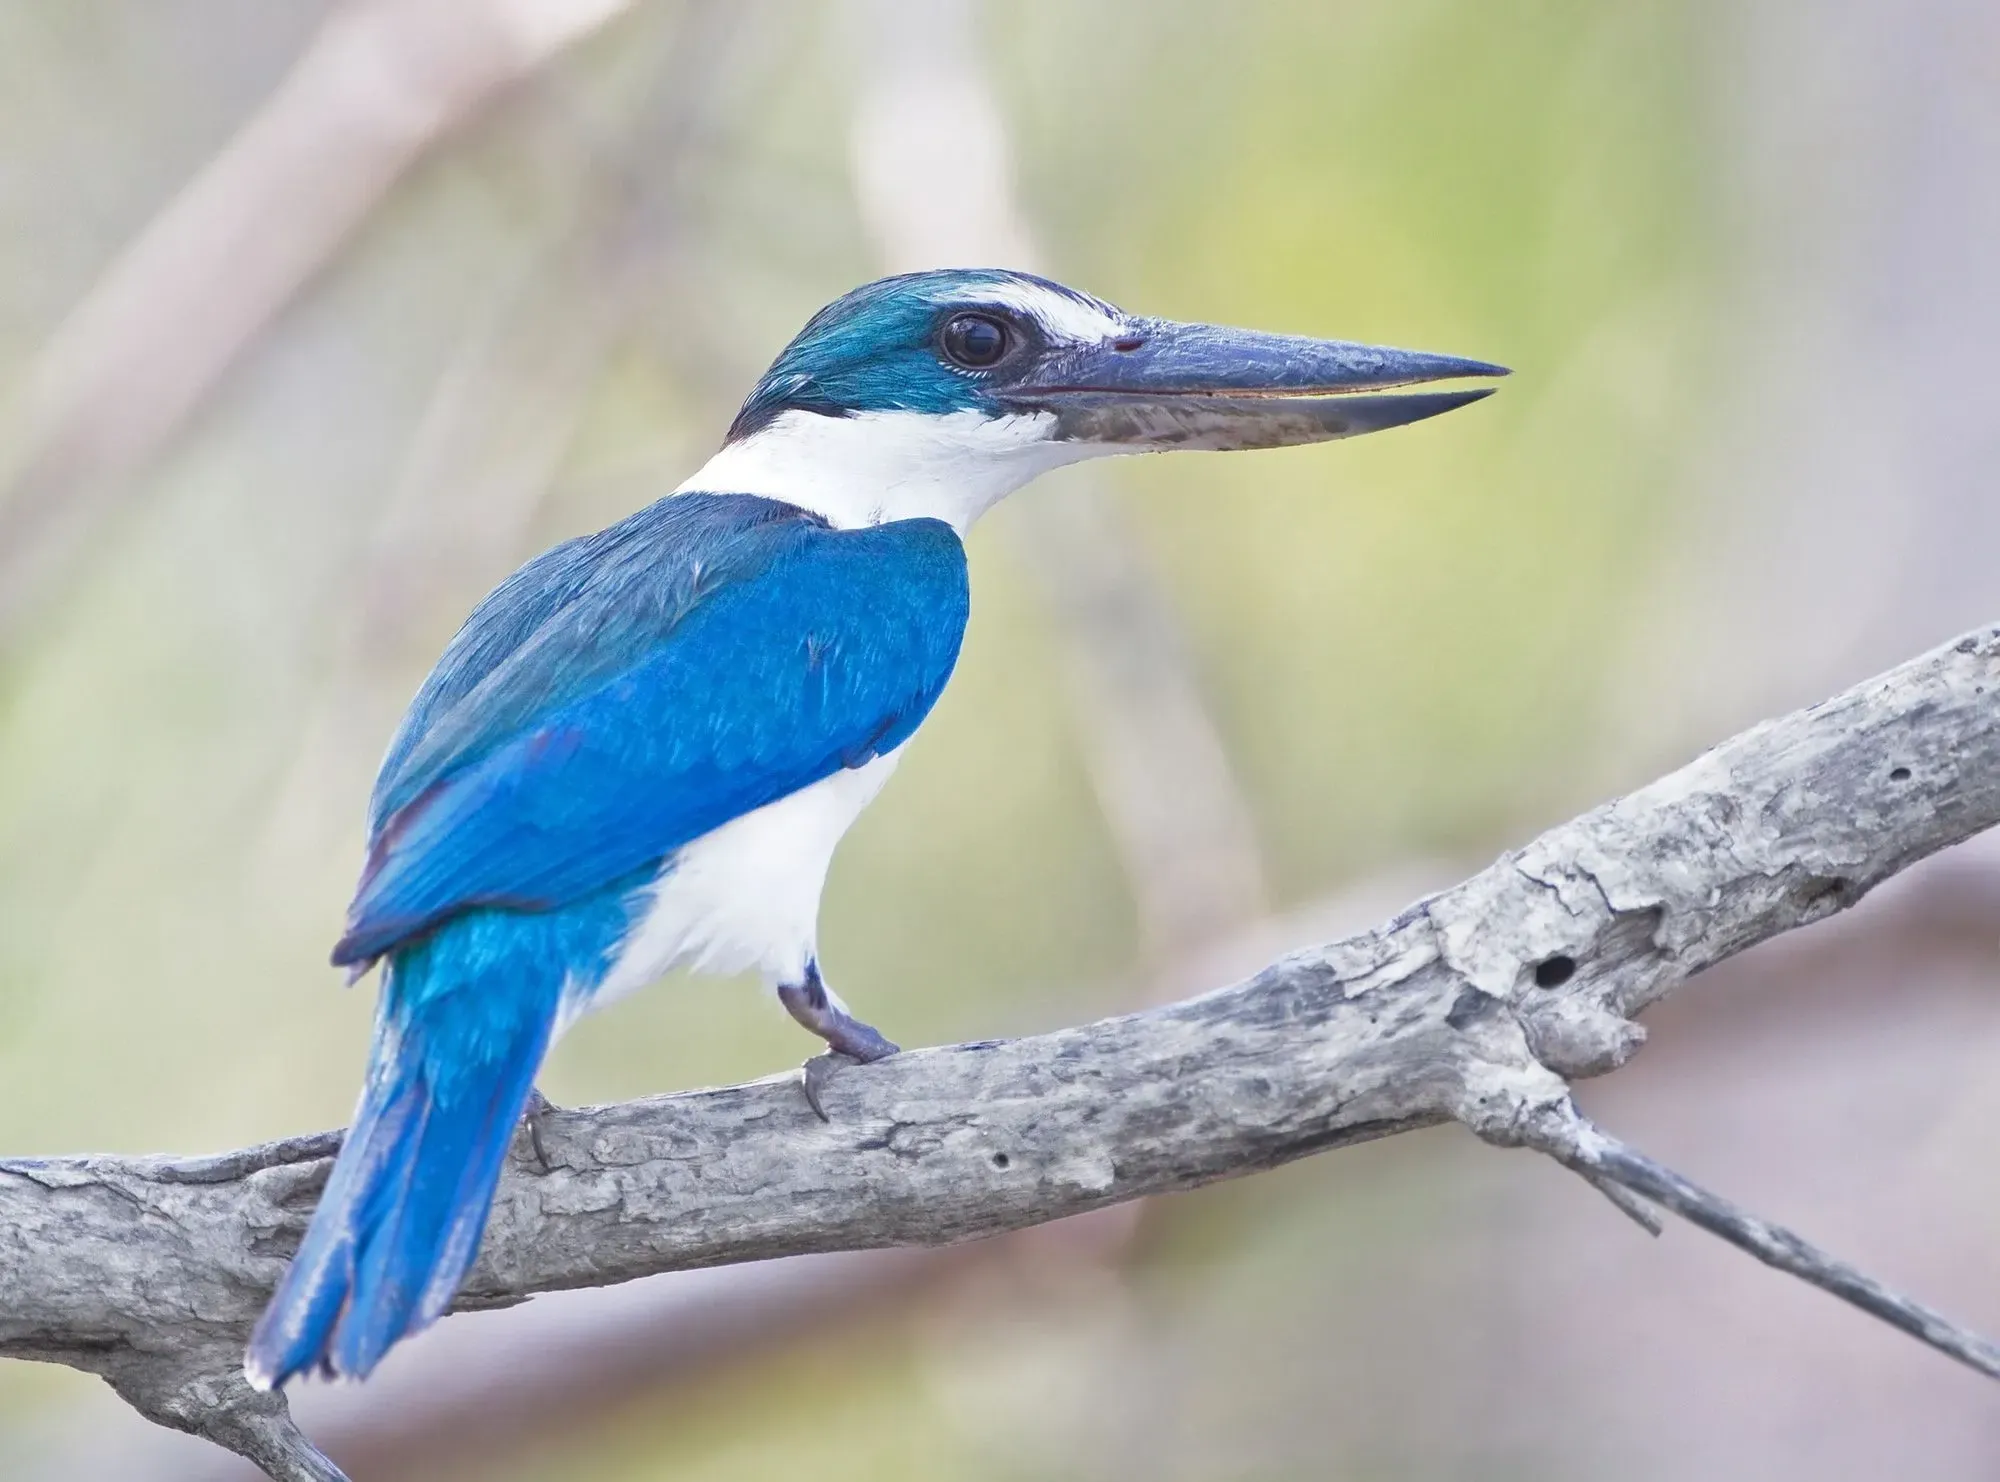 Collared kingfisher facts are about territorial birds that sometimes have blue feathers.